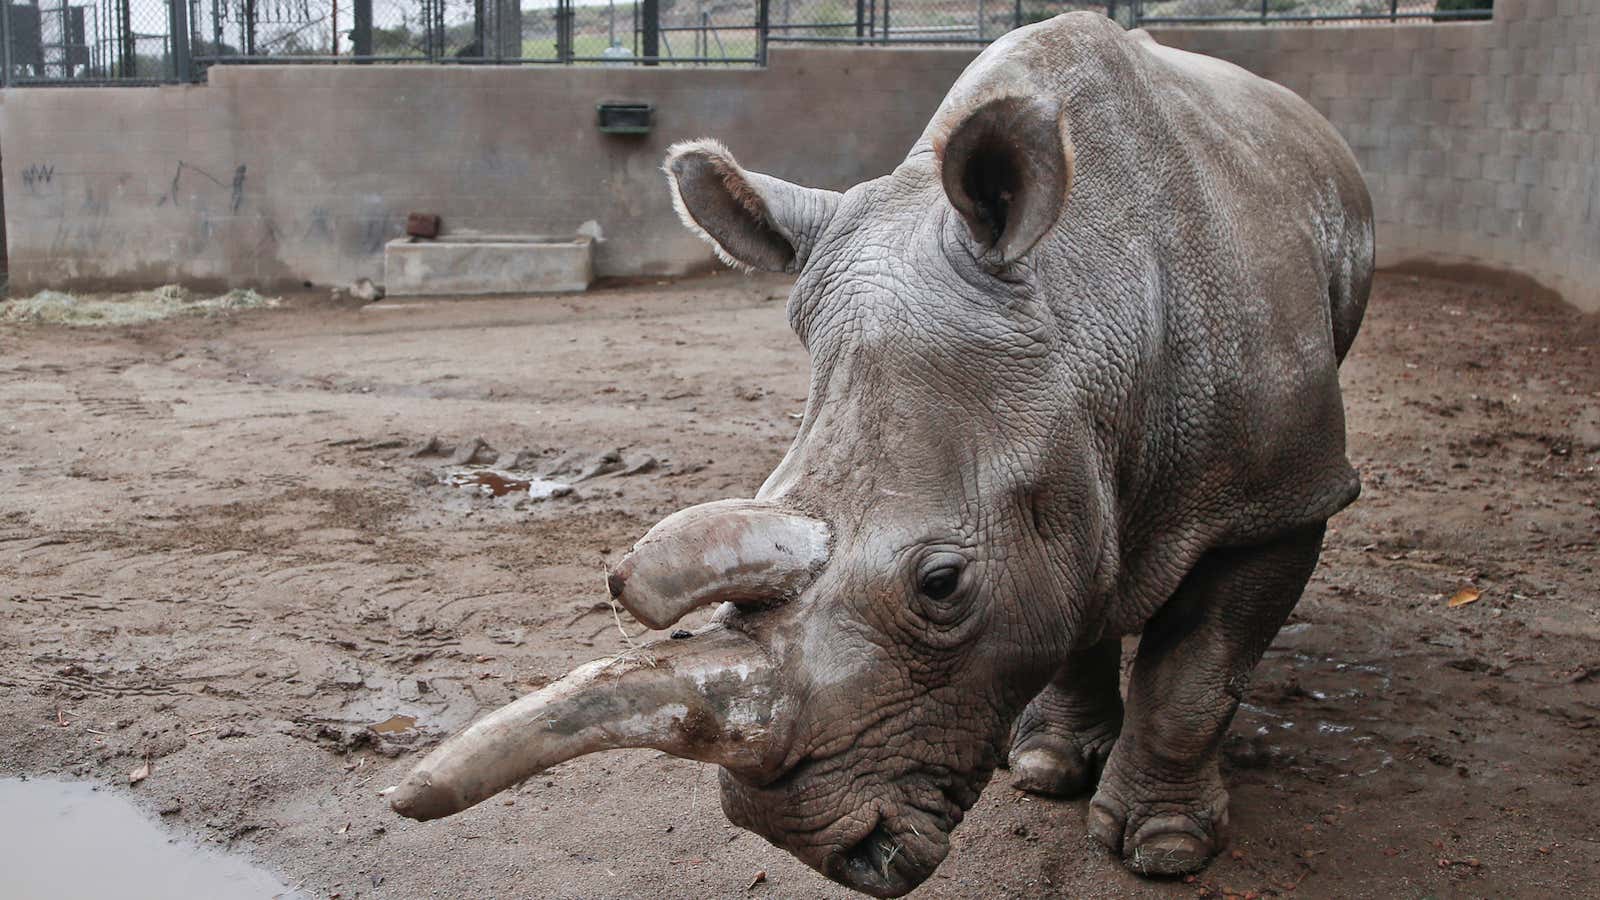 Nola was put down at the San Diego Zoo after health complications.